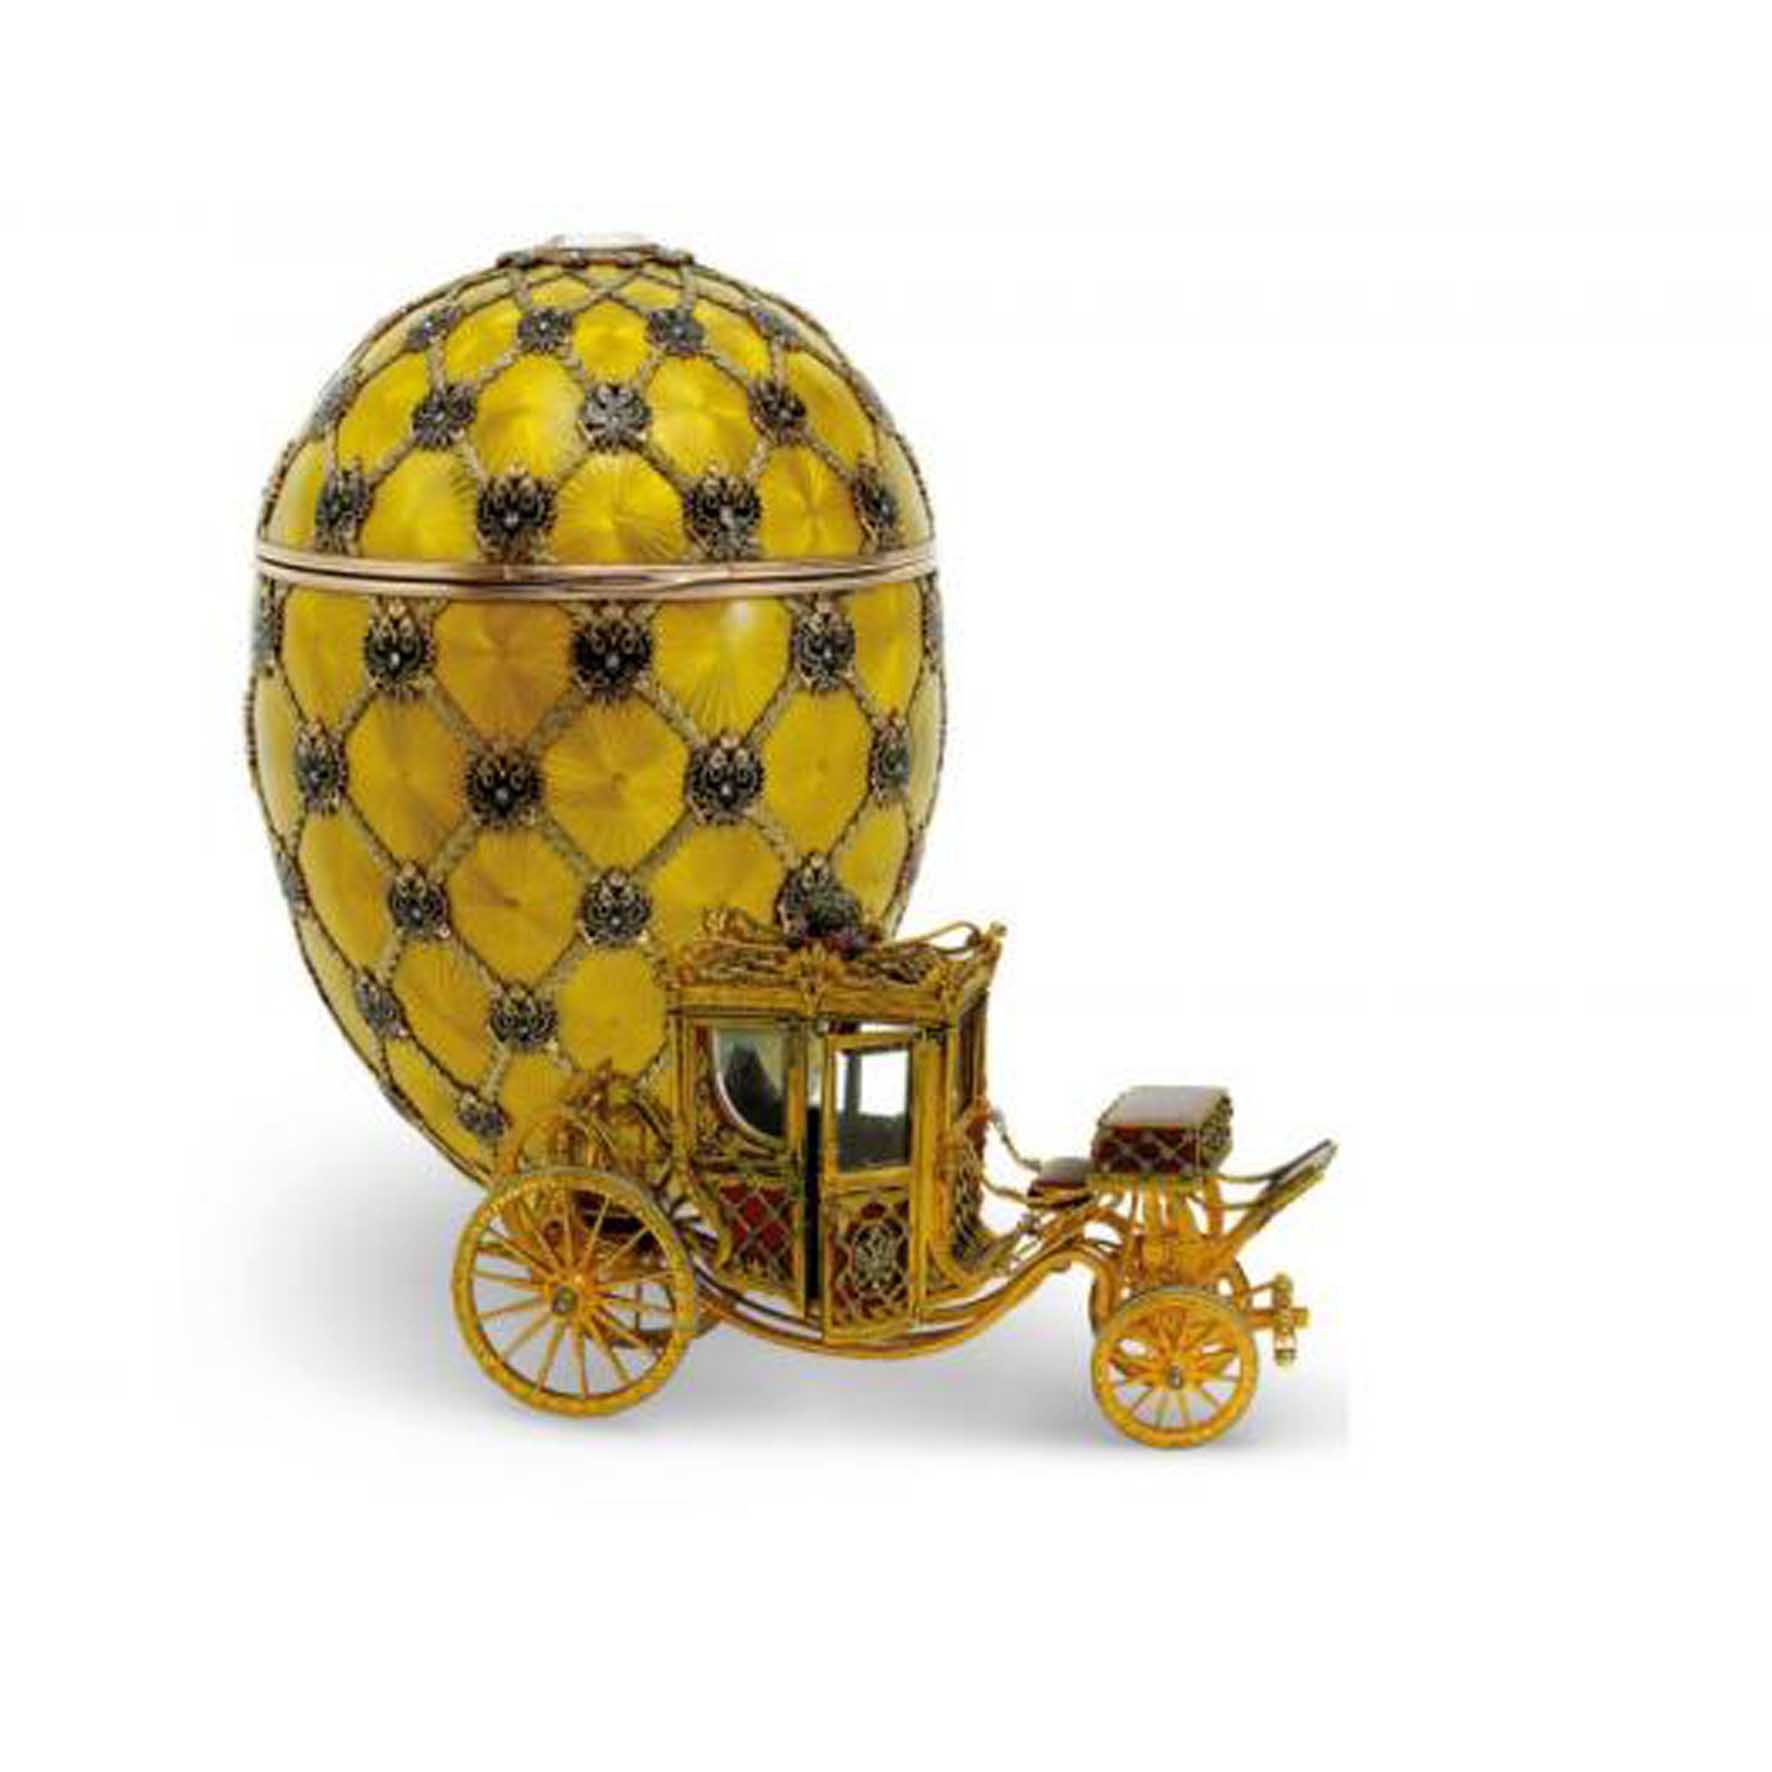 Fabergé at the Venaria Reale. The Jewelry of the last Zars